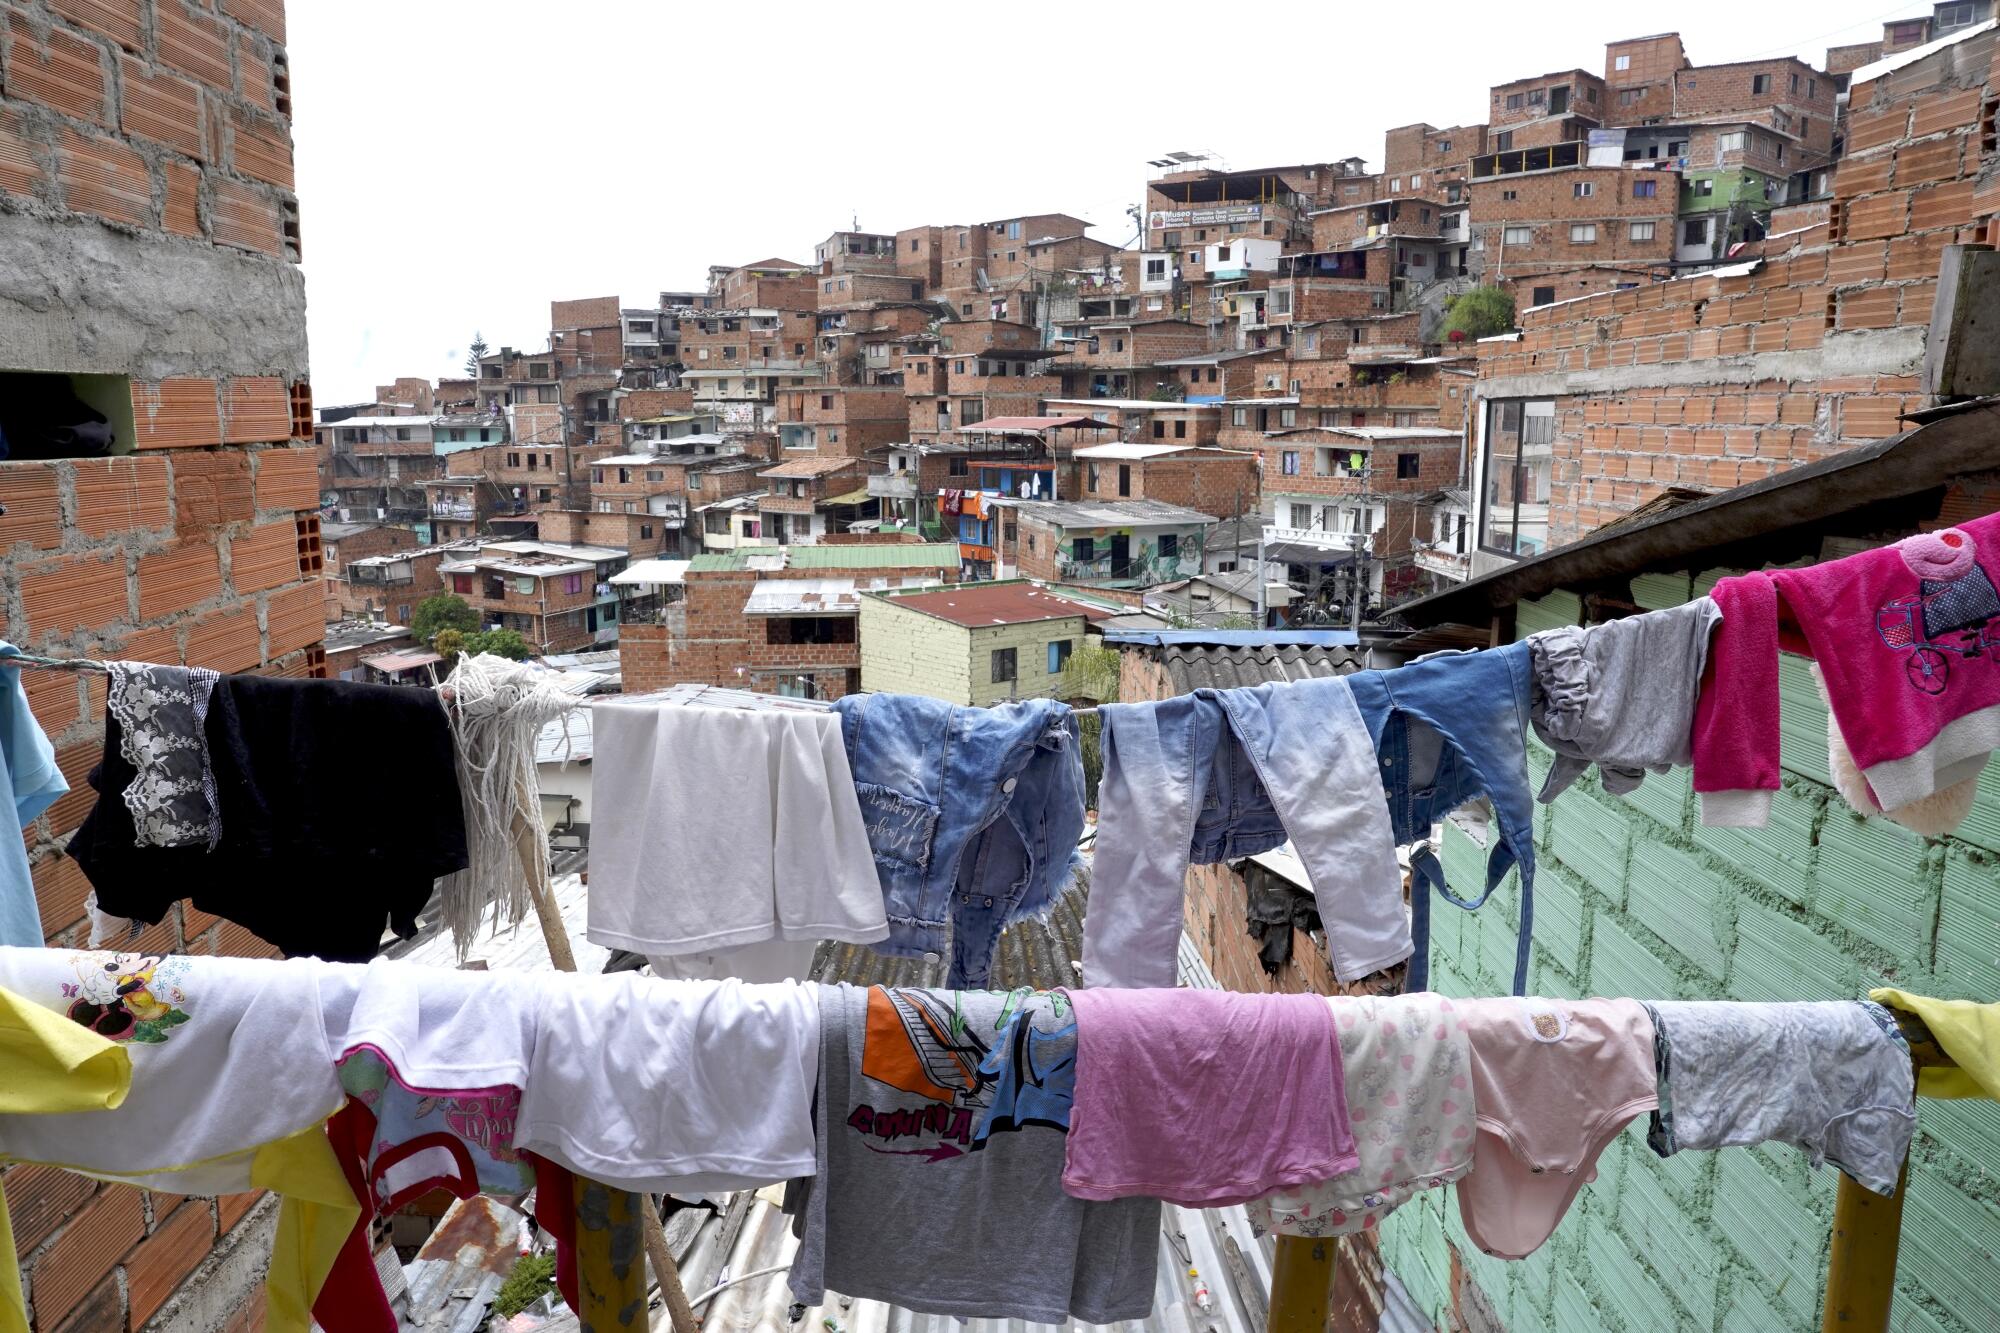 Clothes hangs outside with the city in the background.